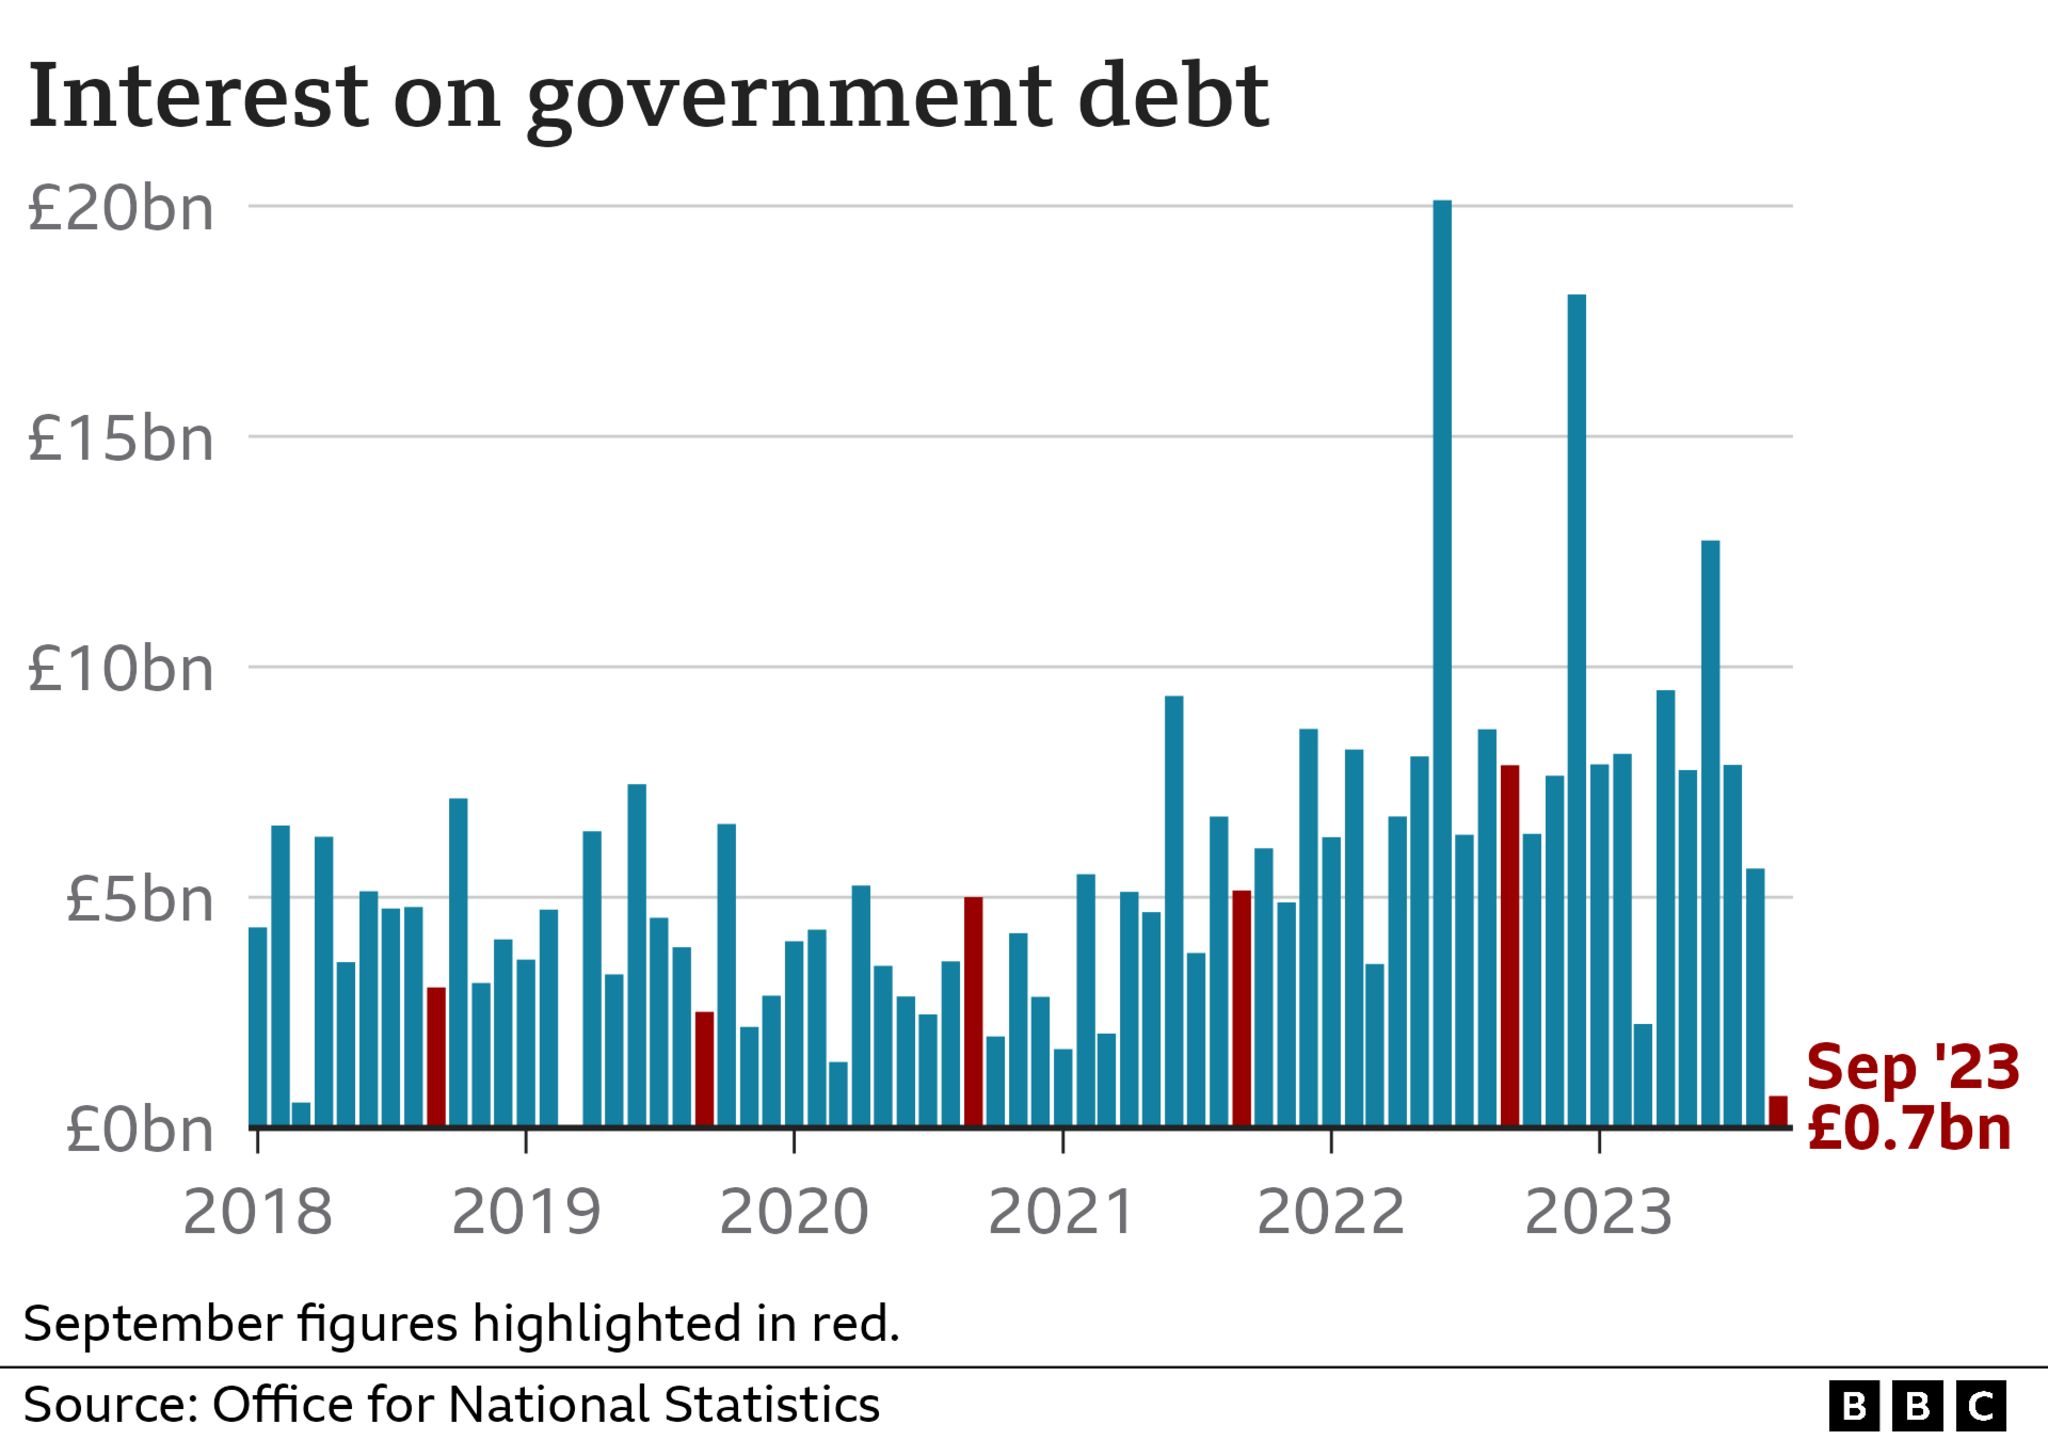 Bar chart showing interest on UK government debt was £0.7bn in September 2023